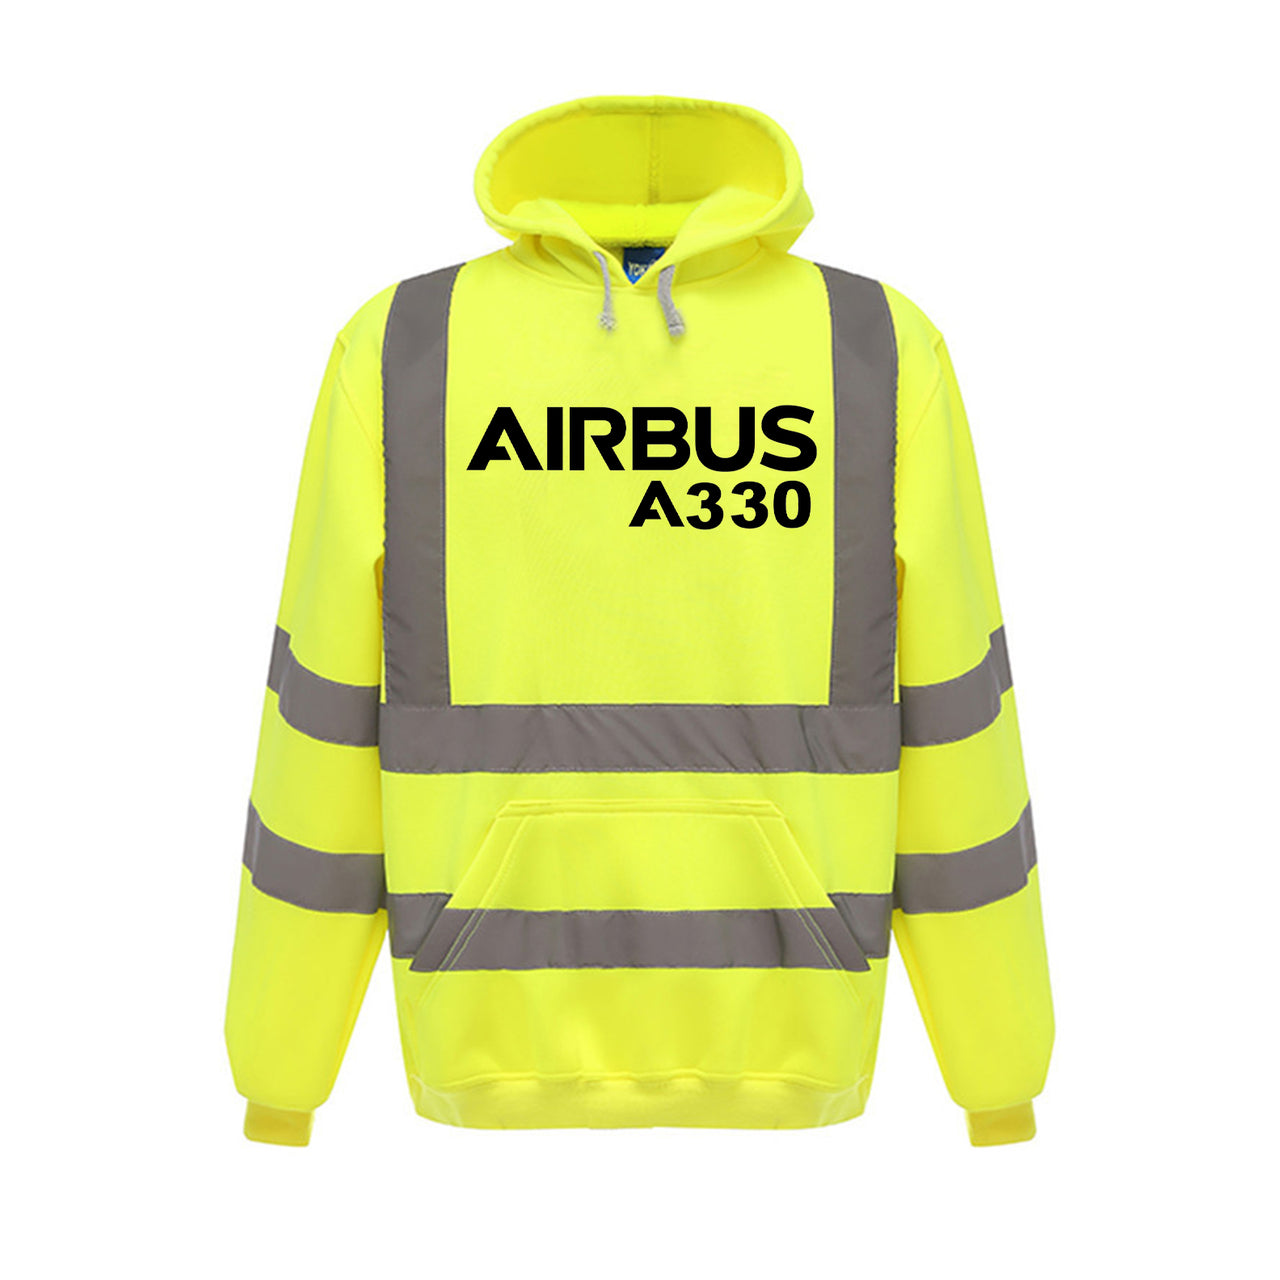 Airbus A330 & Text Designed Reflective Hoodies